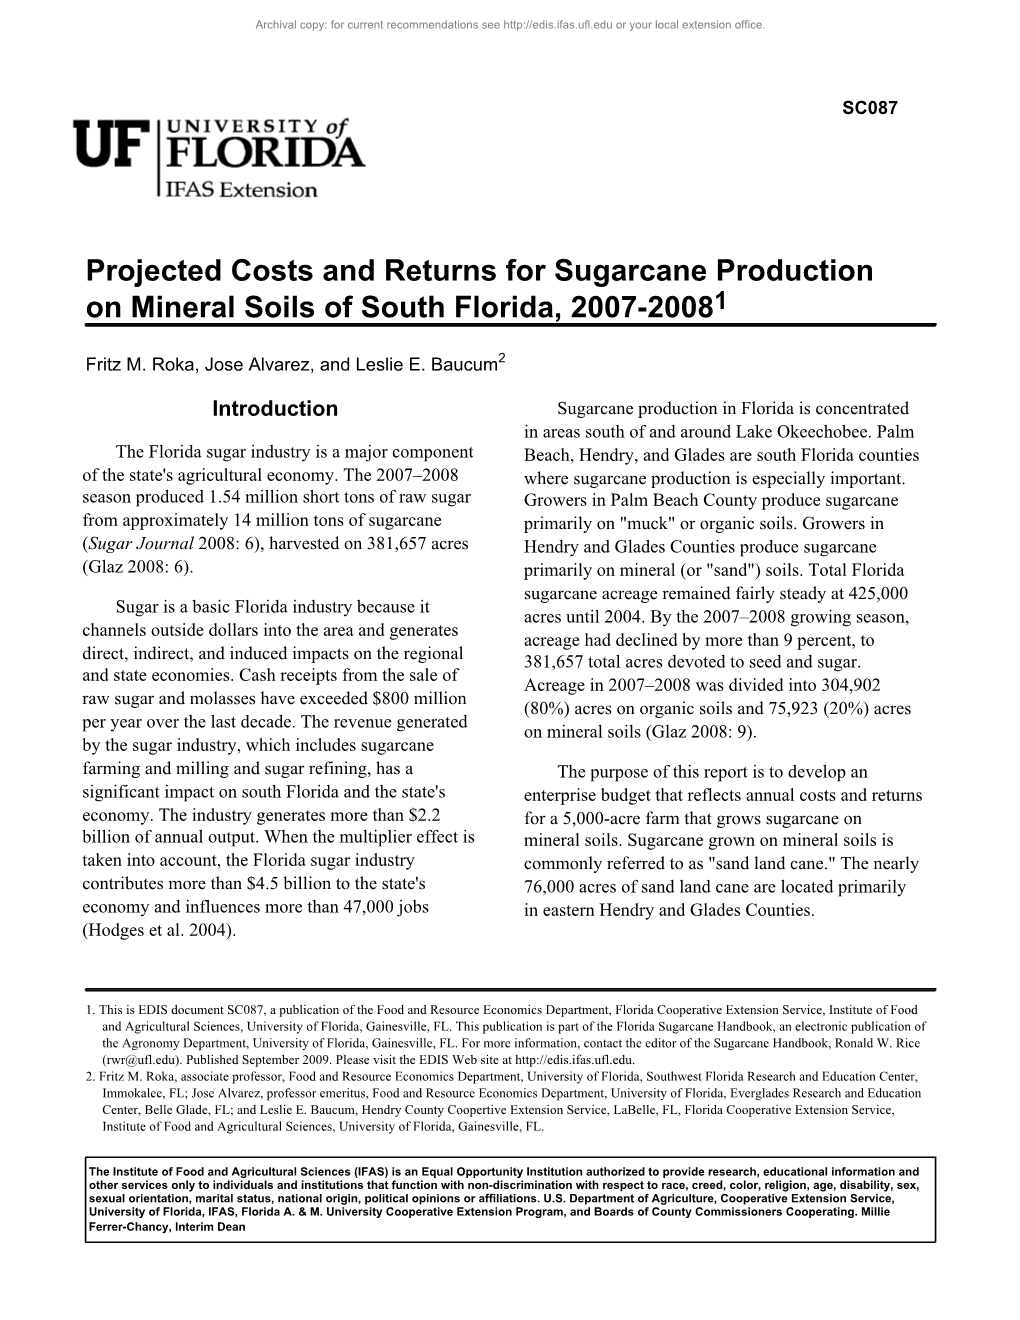 Projected Costs and Returns for Sugarcane Production on Mineral Soils of South Florida, 2007-20081